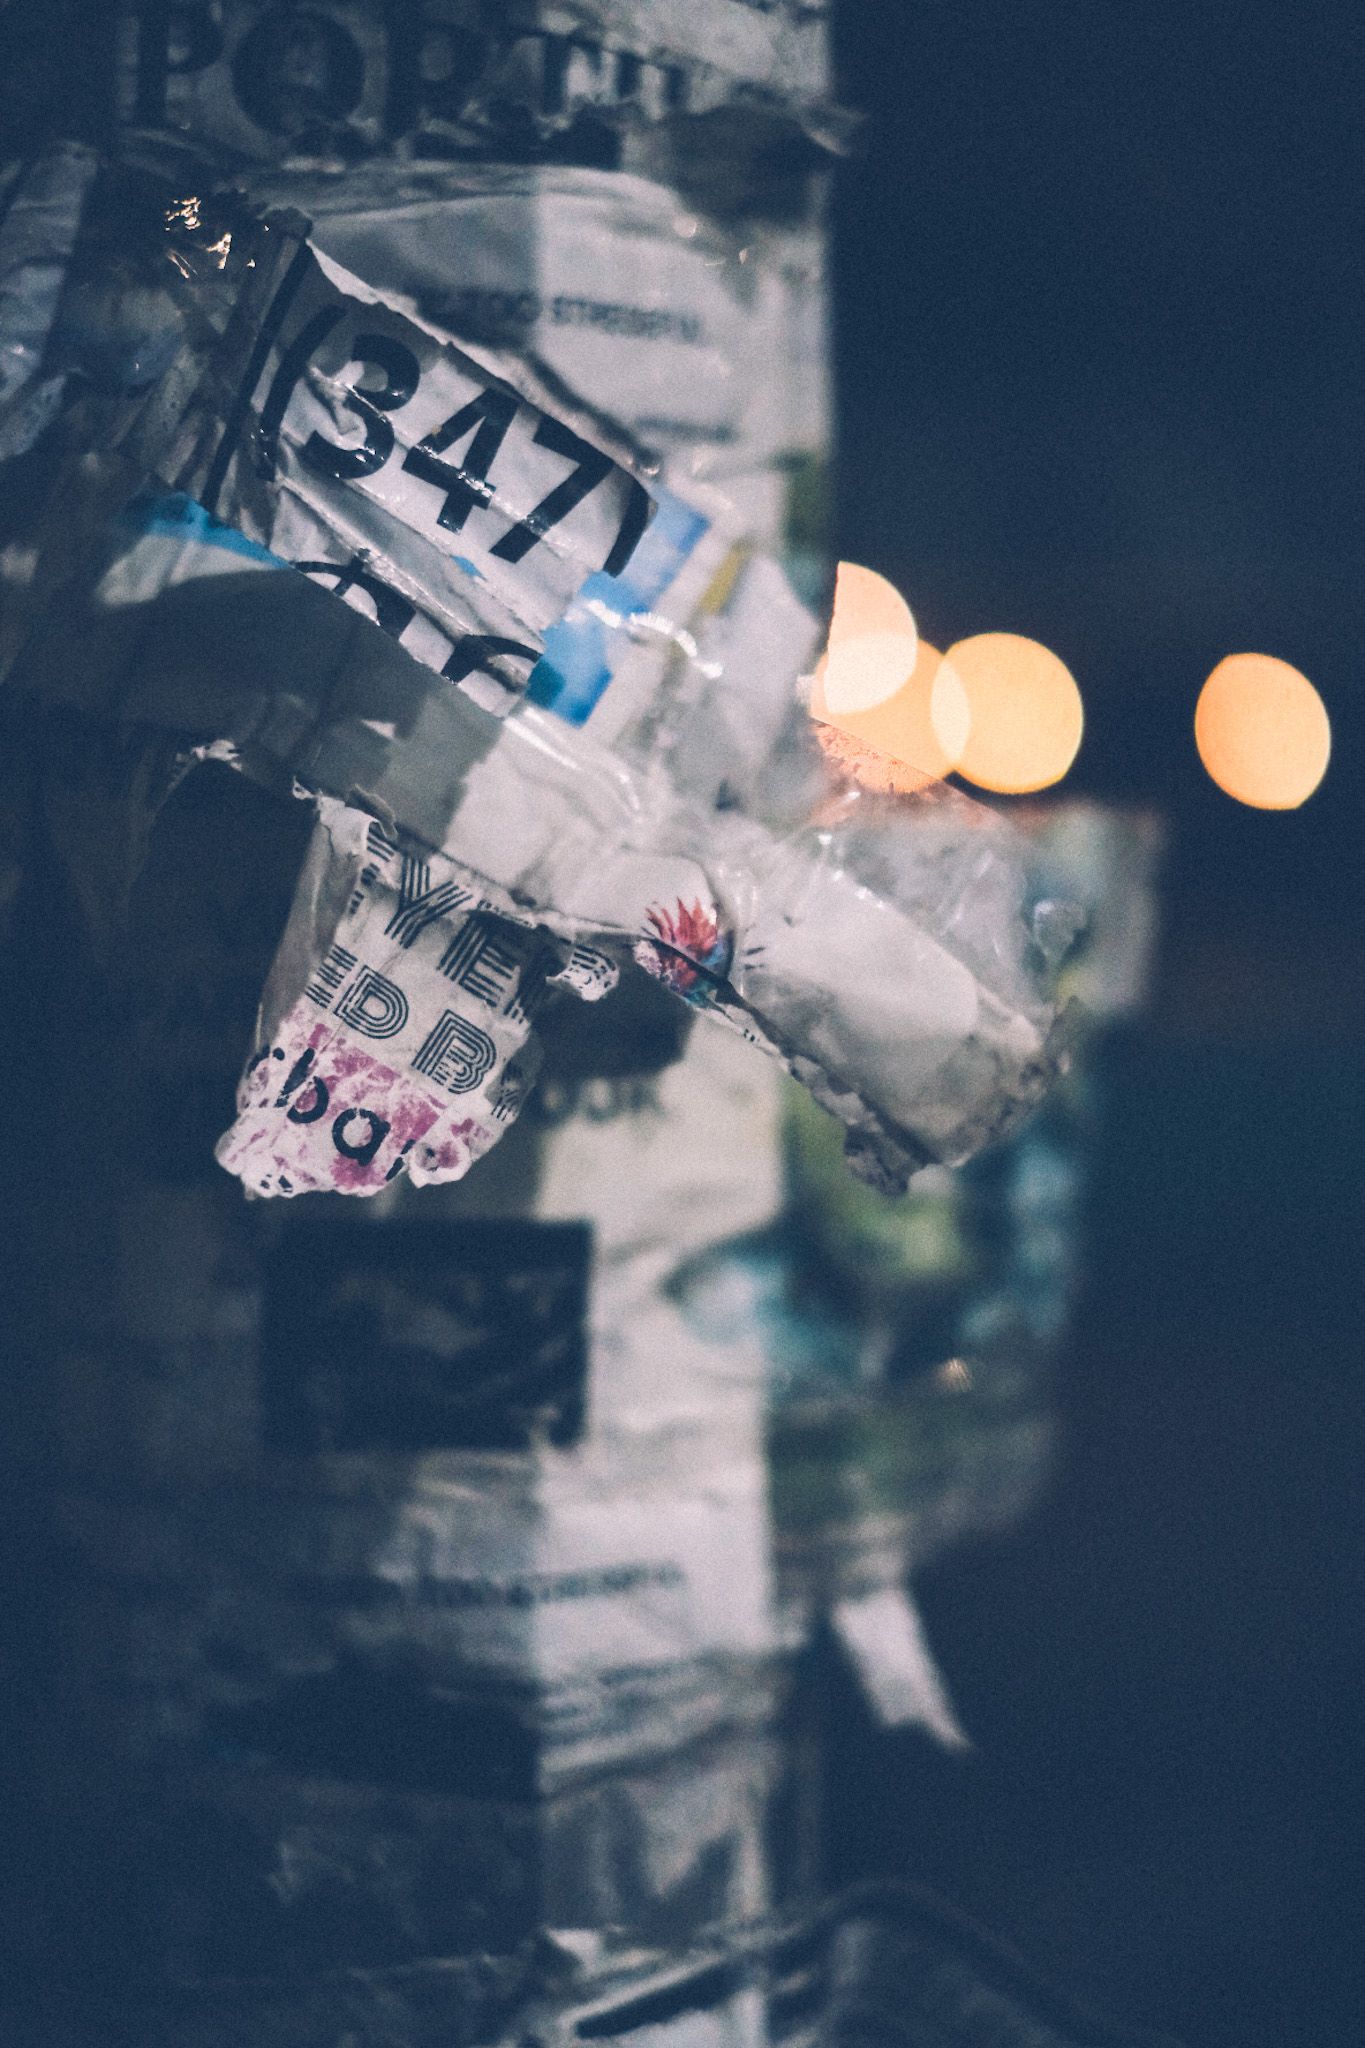 A bunch of different flyers have been papered on a light post. The main flyer, covered in tape, is ripped, but you can see the number 347 printed at the top, black on white. Lights bokeh in the background.